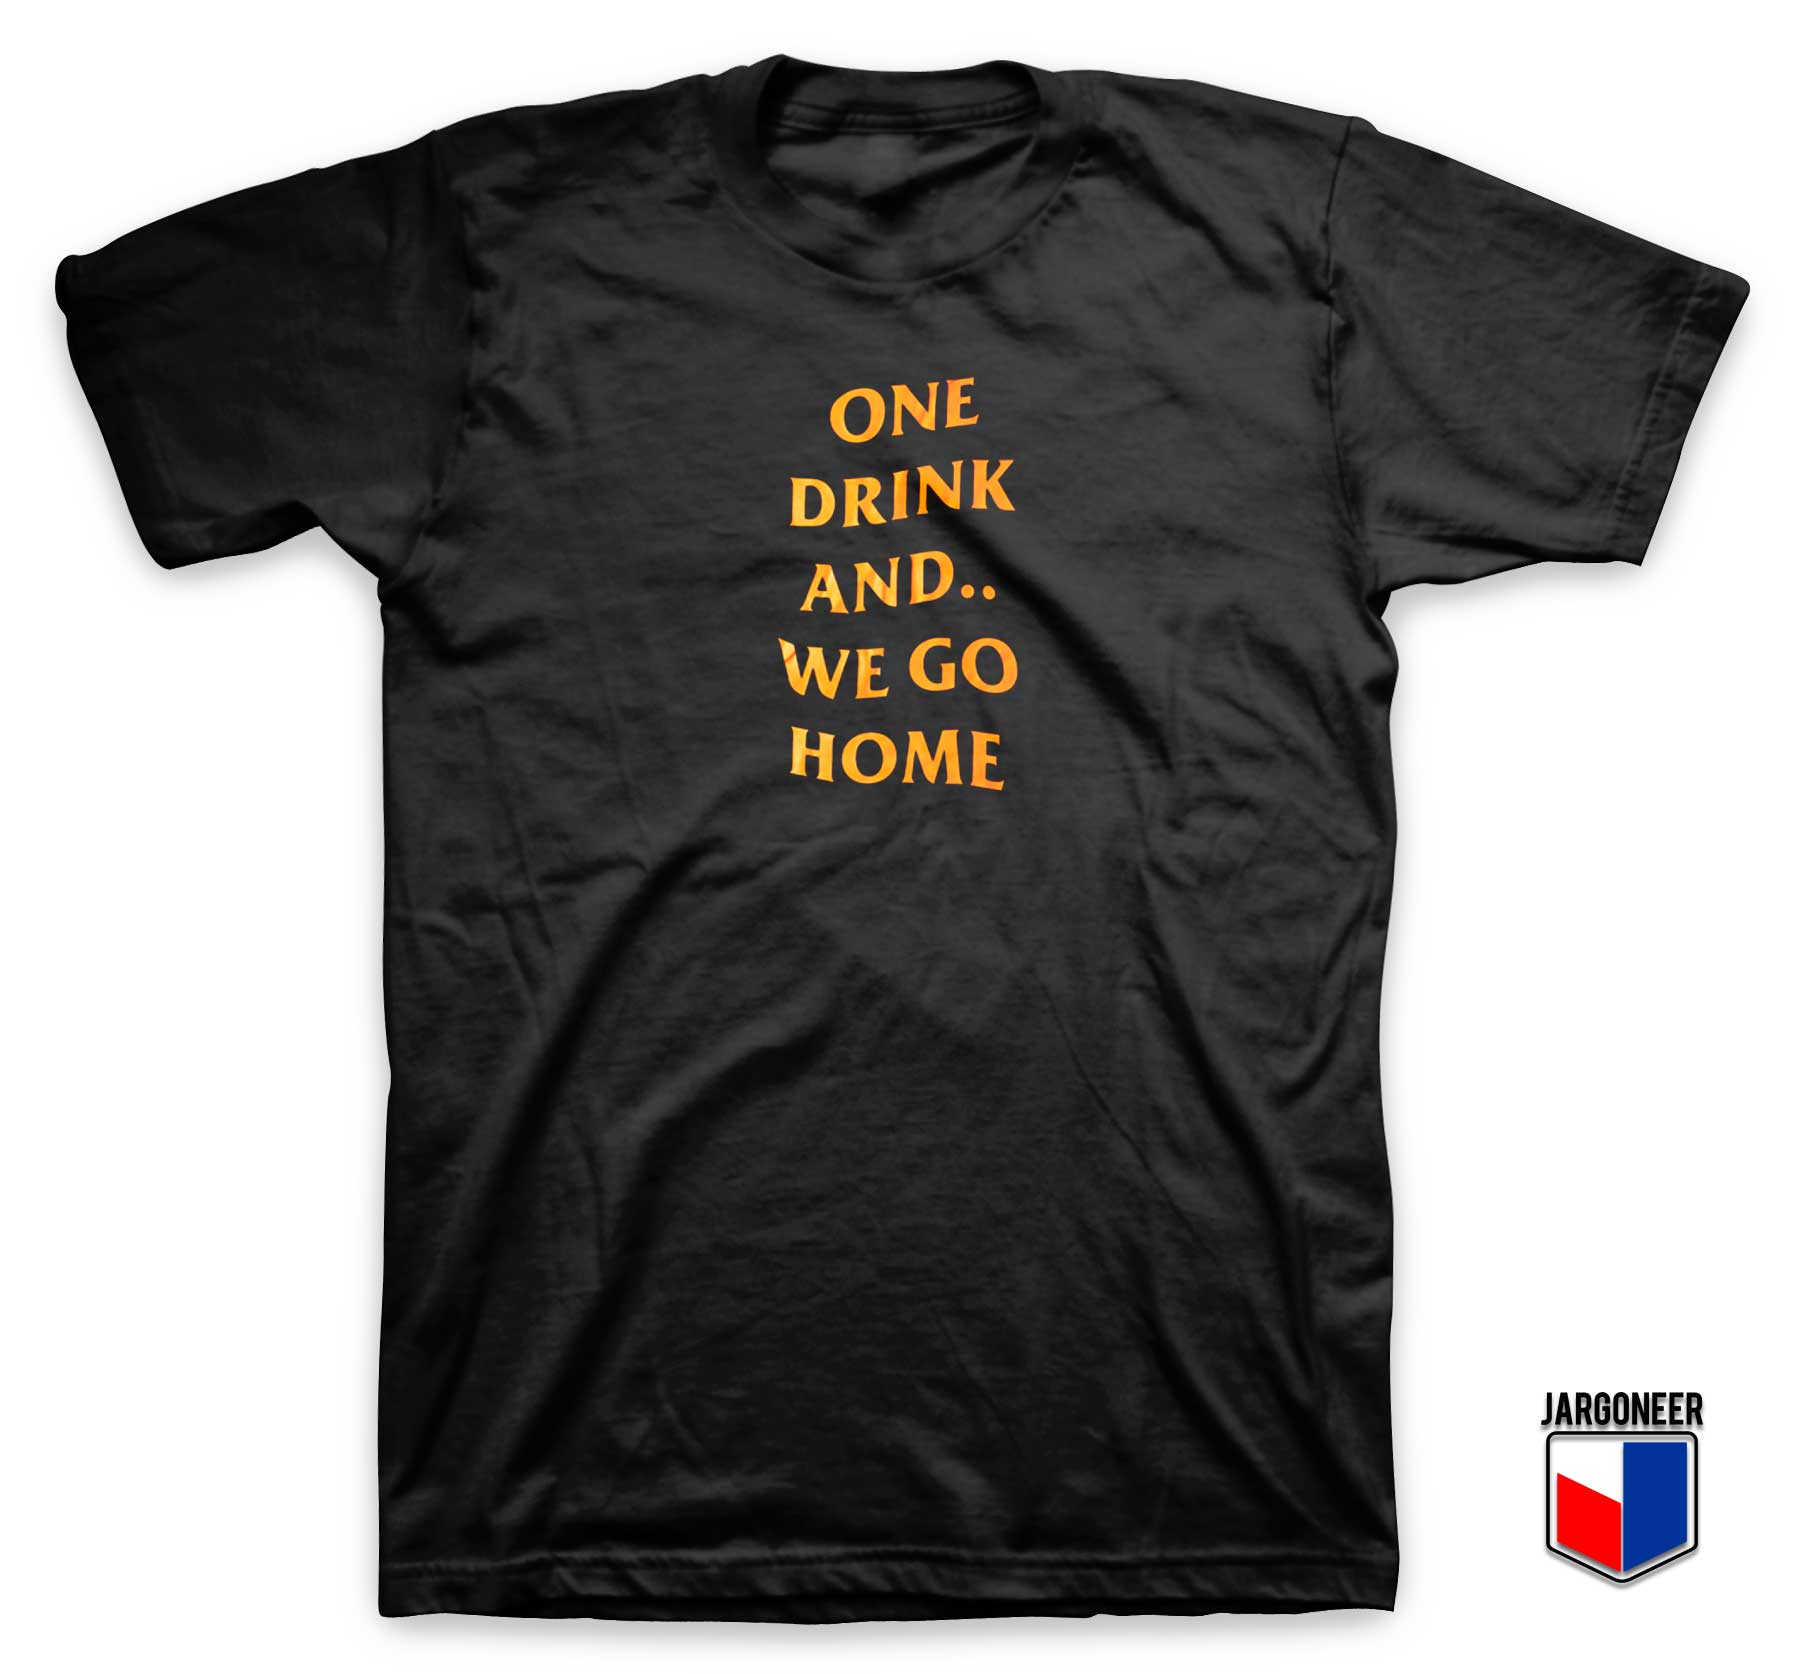 One Drink And We Go Home T shirt - Shop Unique Graphic Cool Shirt Designs